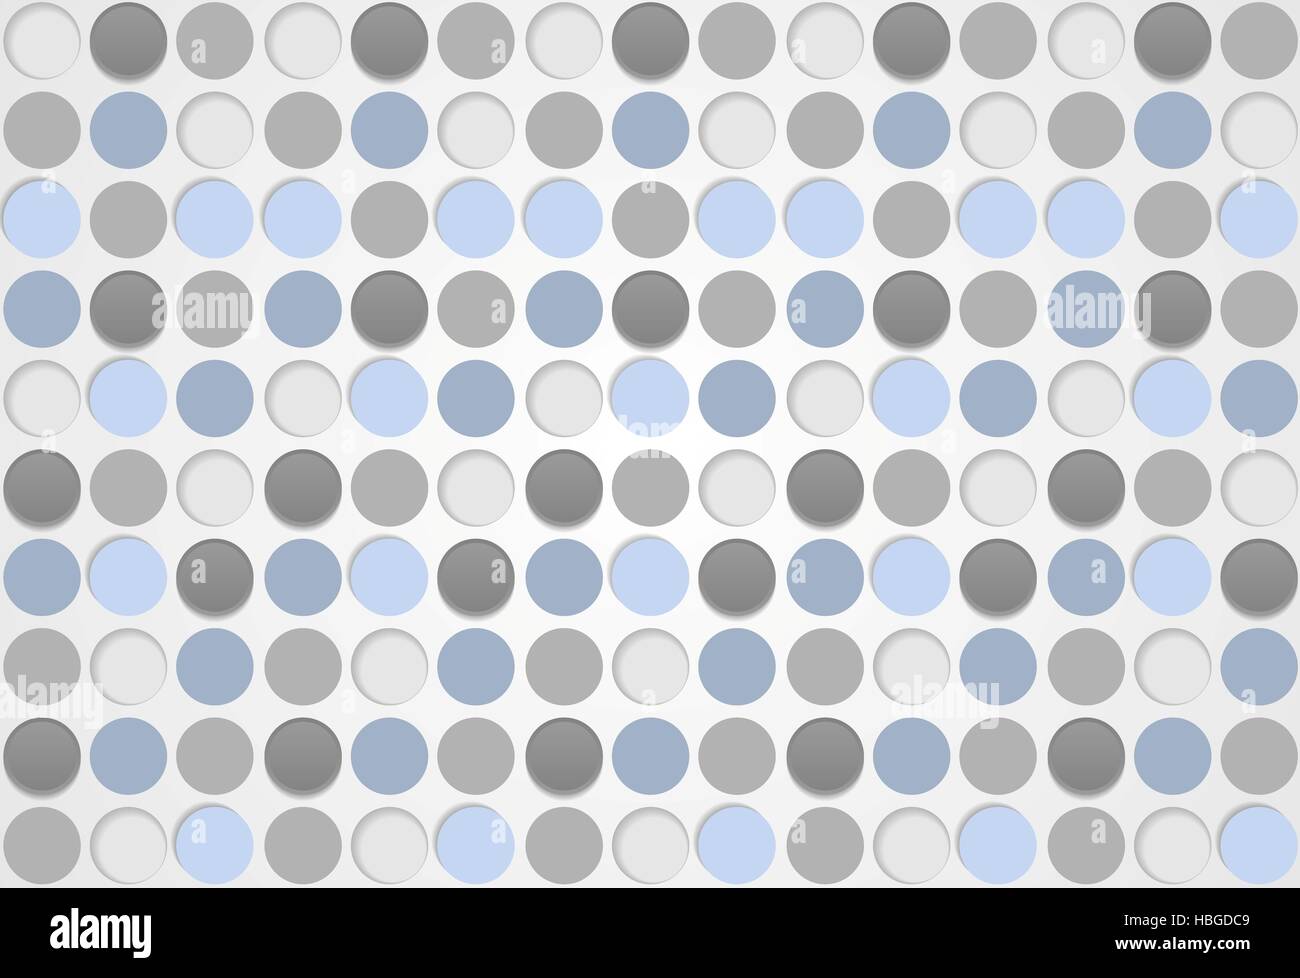 Blue and grey circles pattern design Stock Photo